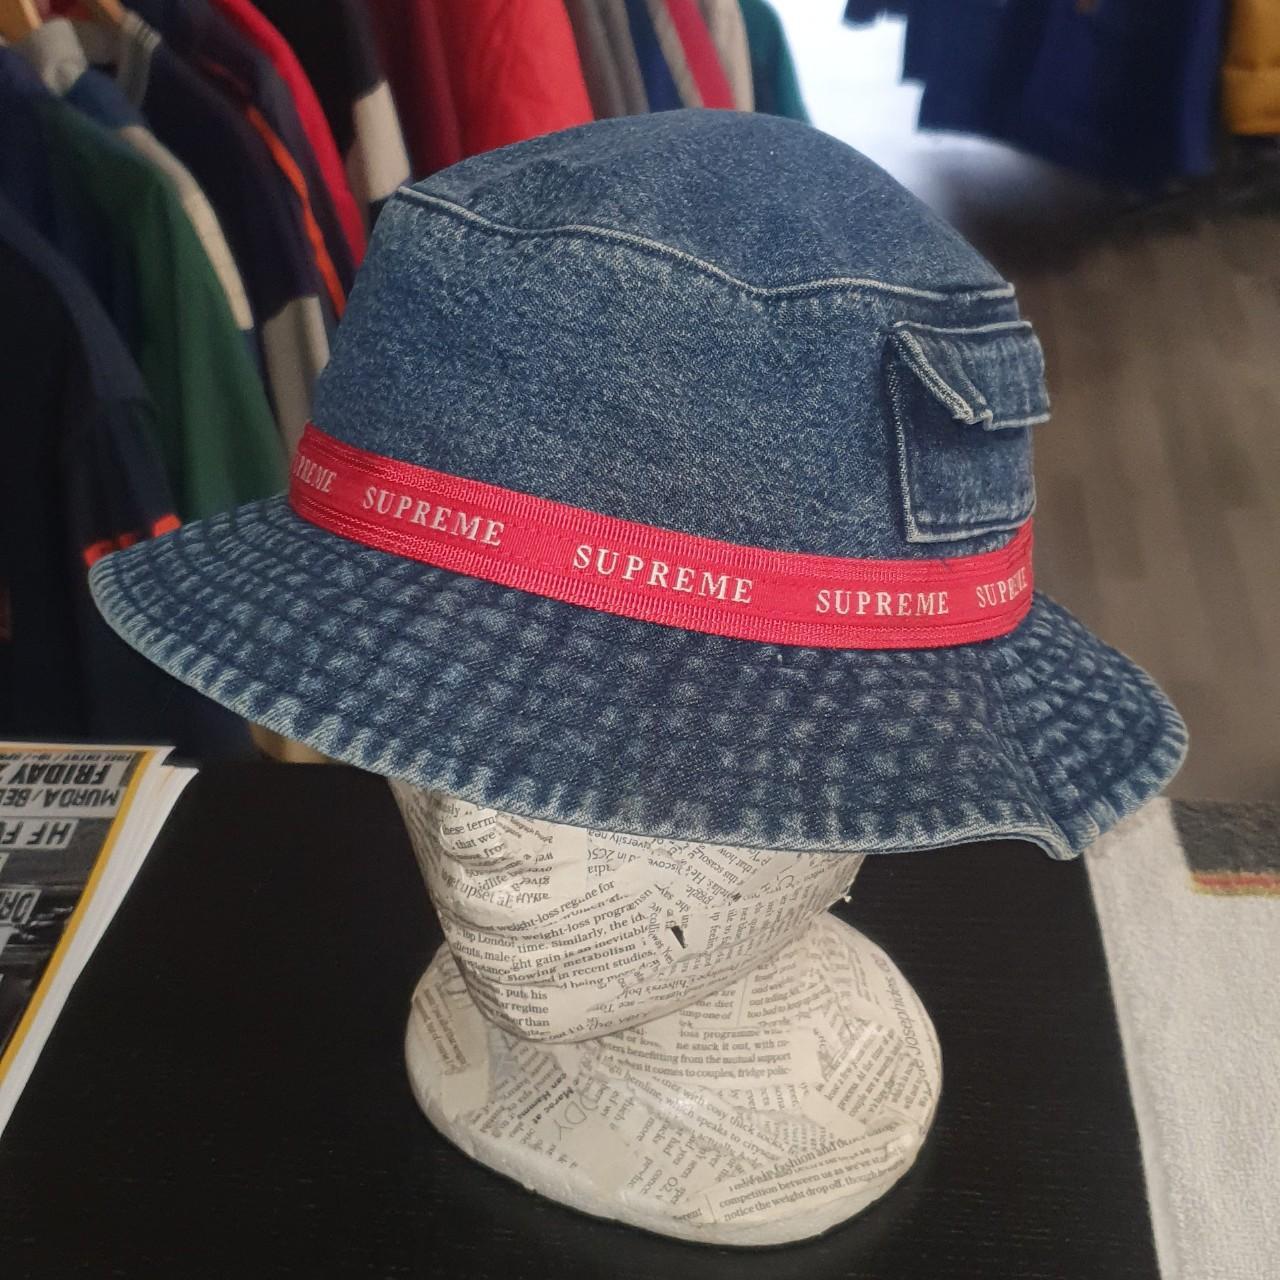 Supreme Men's Blue and Red Hat